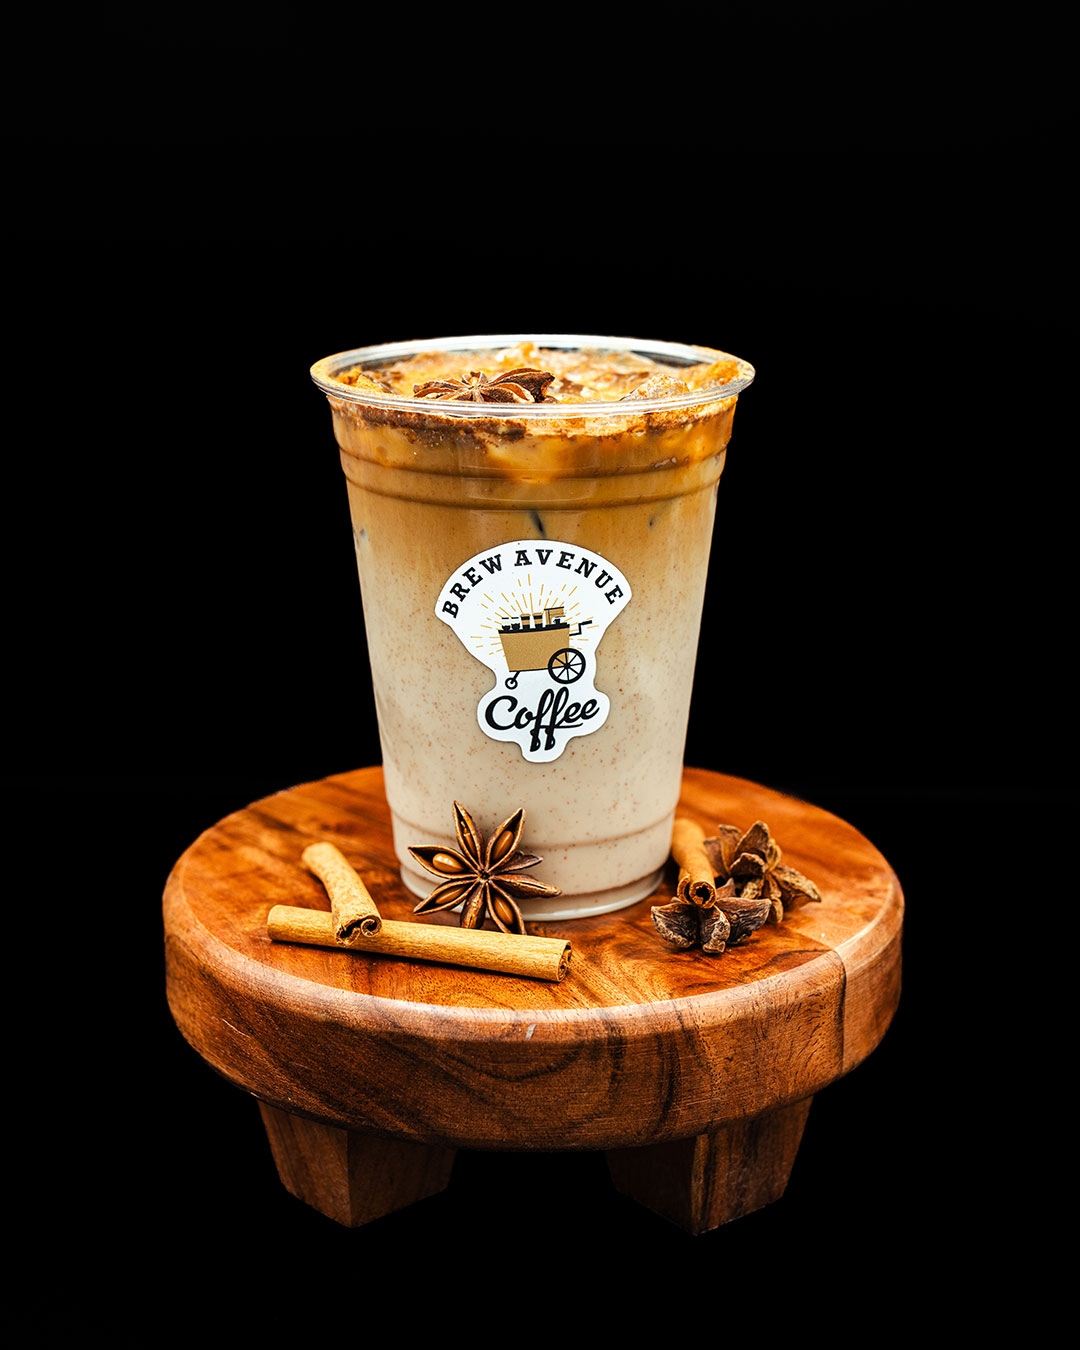 A clear cup with a sticker that shows the Brew Avenue Coffee logo is sitting on a wooden stool against a black studio background. The cup is filled with iced chai latte with cinnamon sticks on top of the stool.